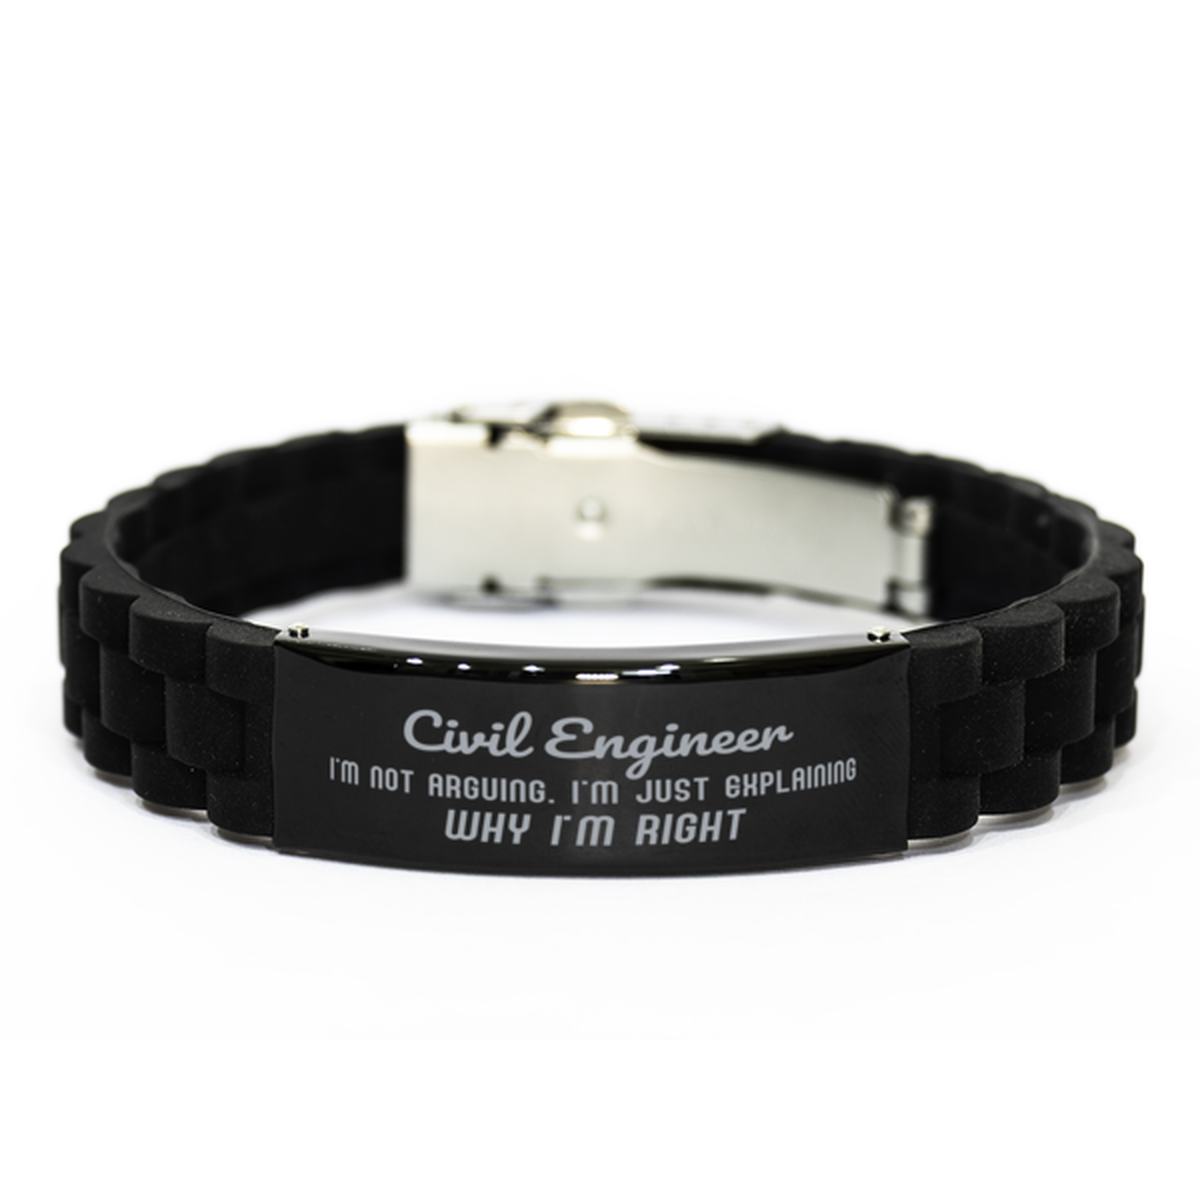 Civil Engineer I'm not Arguing. I'm Just Explaining Why I'm RIGHT Black Glidelock Clasp Bracelet, Funny Saying Quote Civil Engineer Gifts For Civil Engineer Graduation Birthday Christmas Gifts for Men Women Coworker